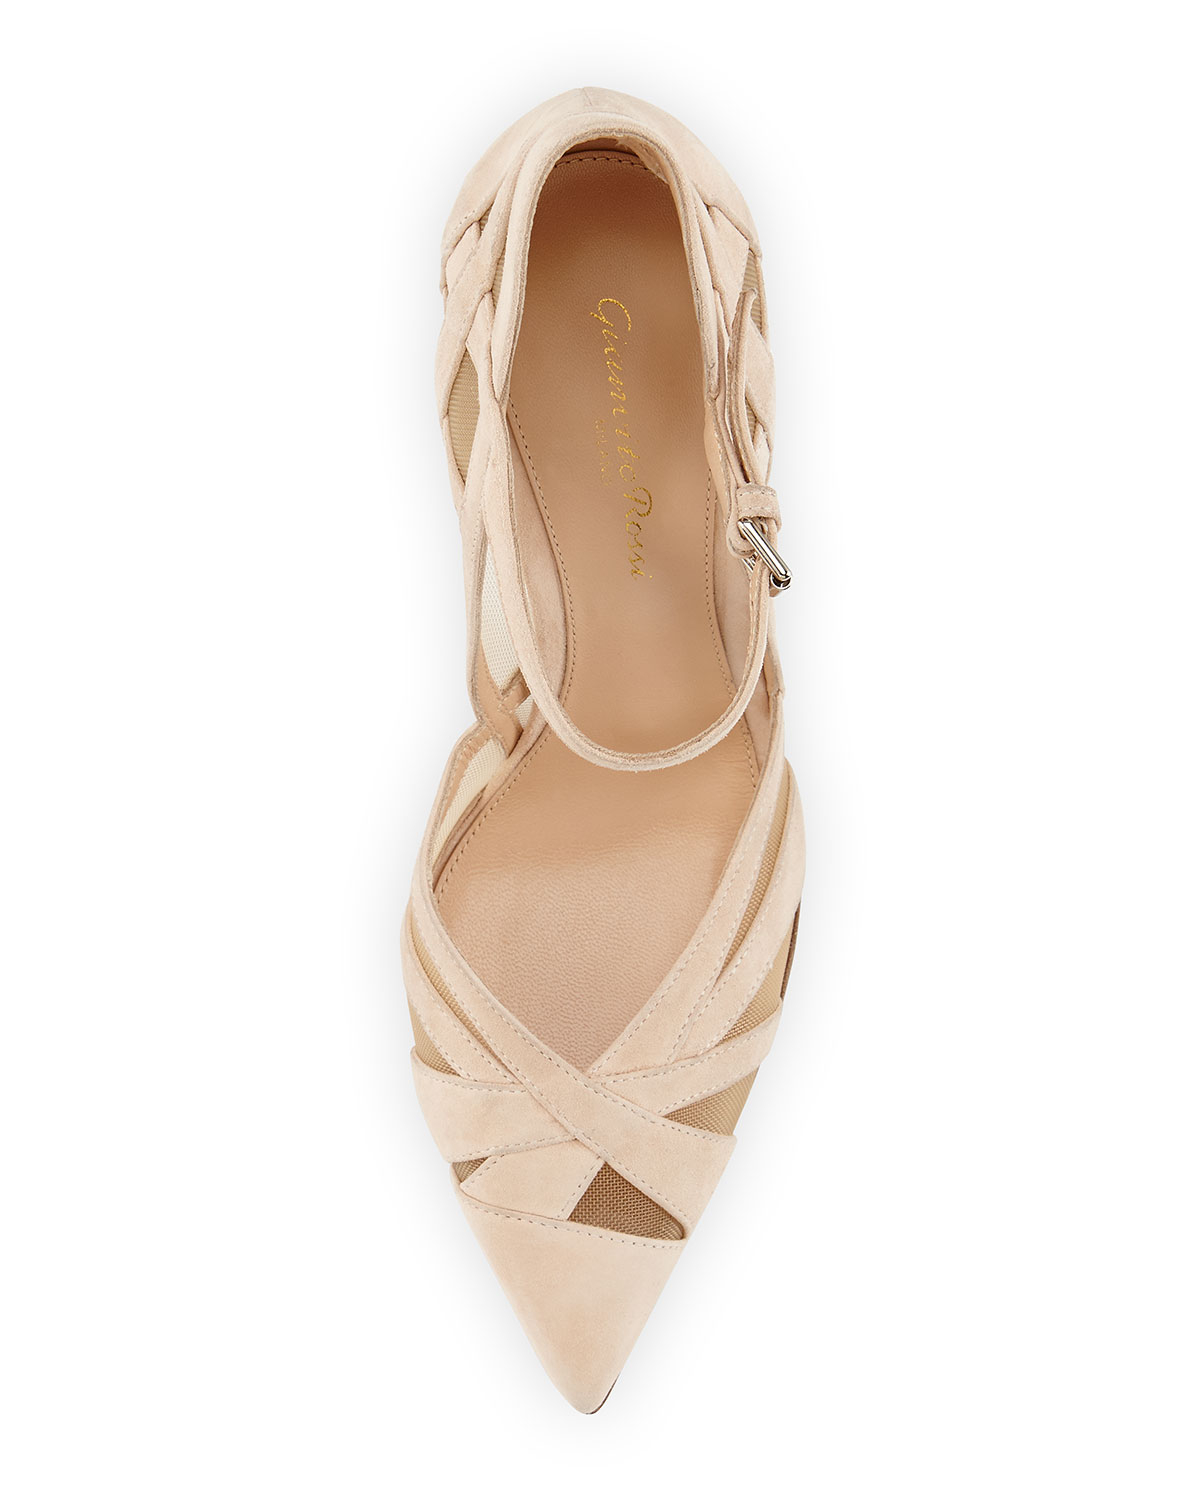 Lyst - Gianvito rossi Suede & Mesh Ankle-Strap Pump in Natural